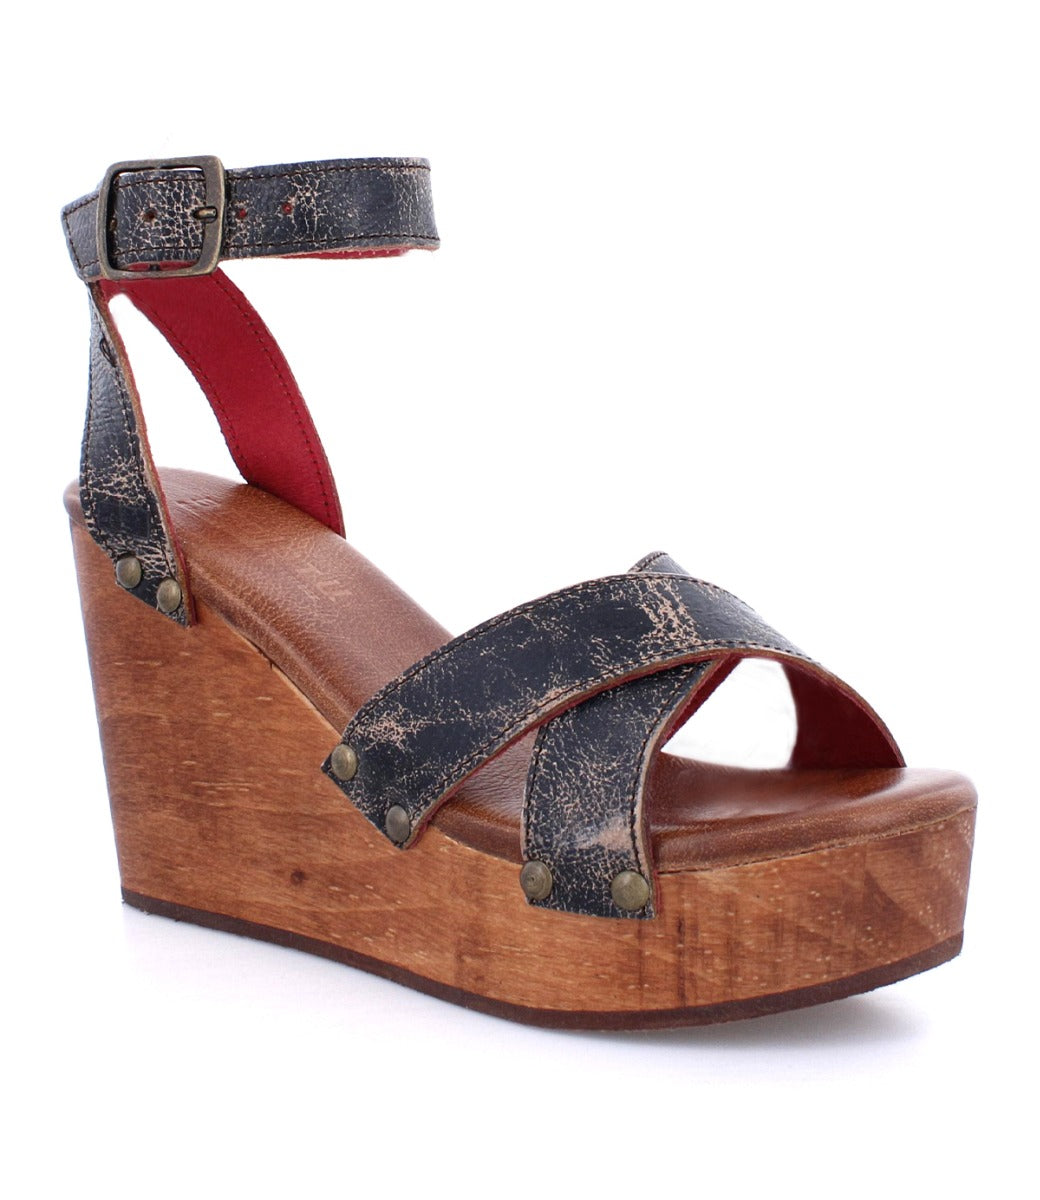 A women's Grettell sandal by Bed Stu with straps.